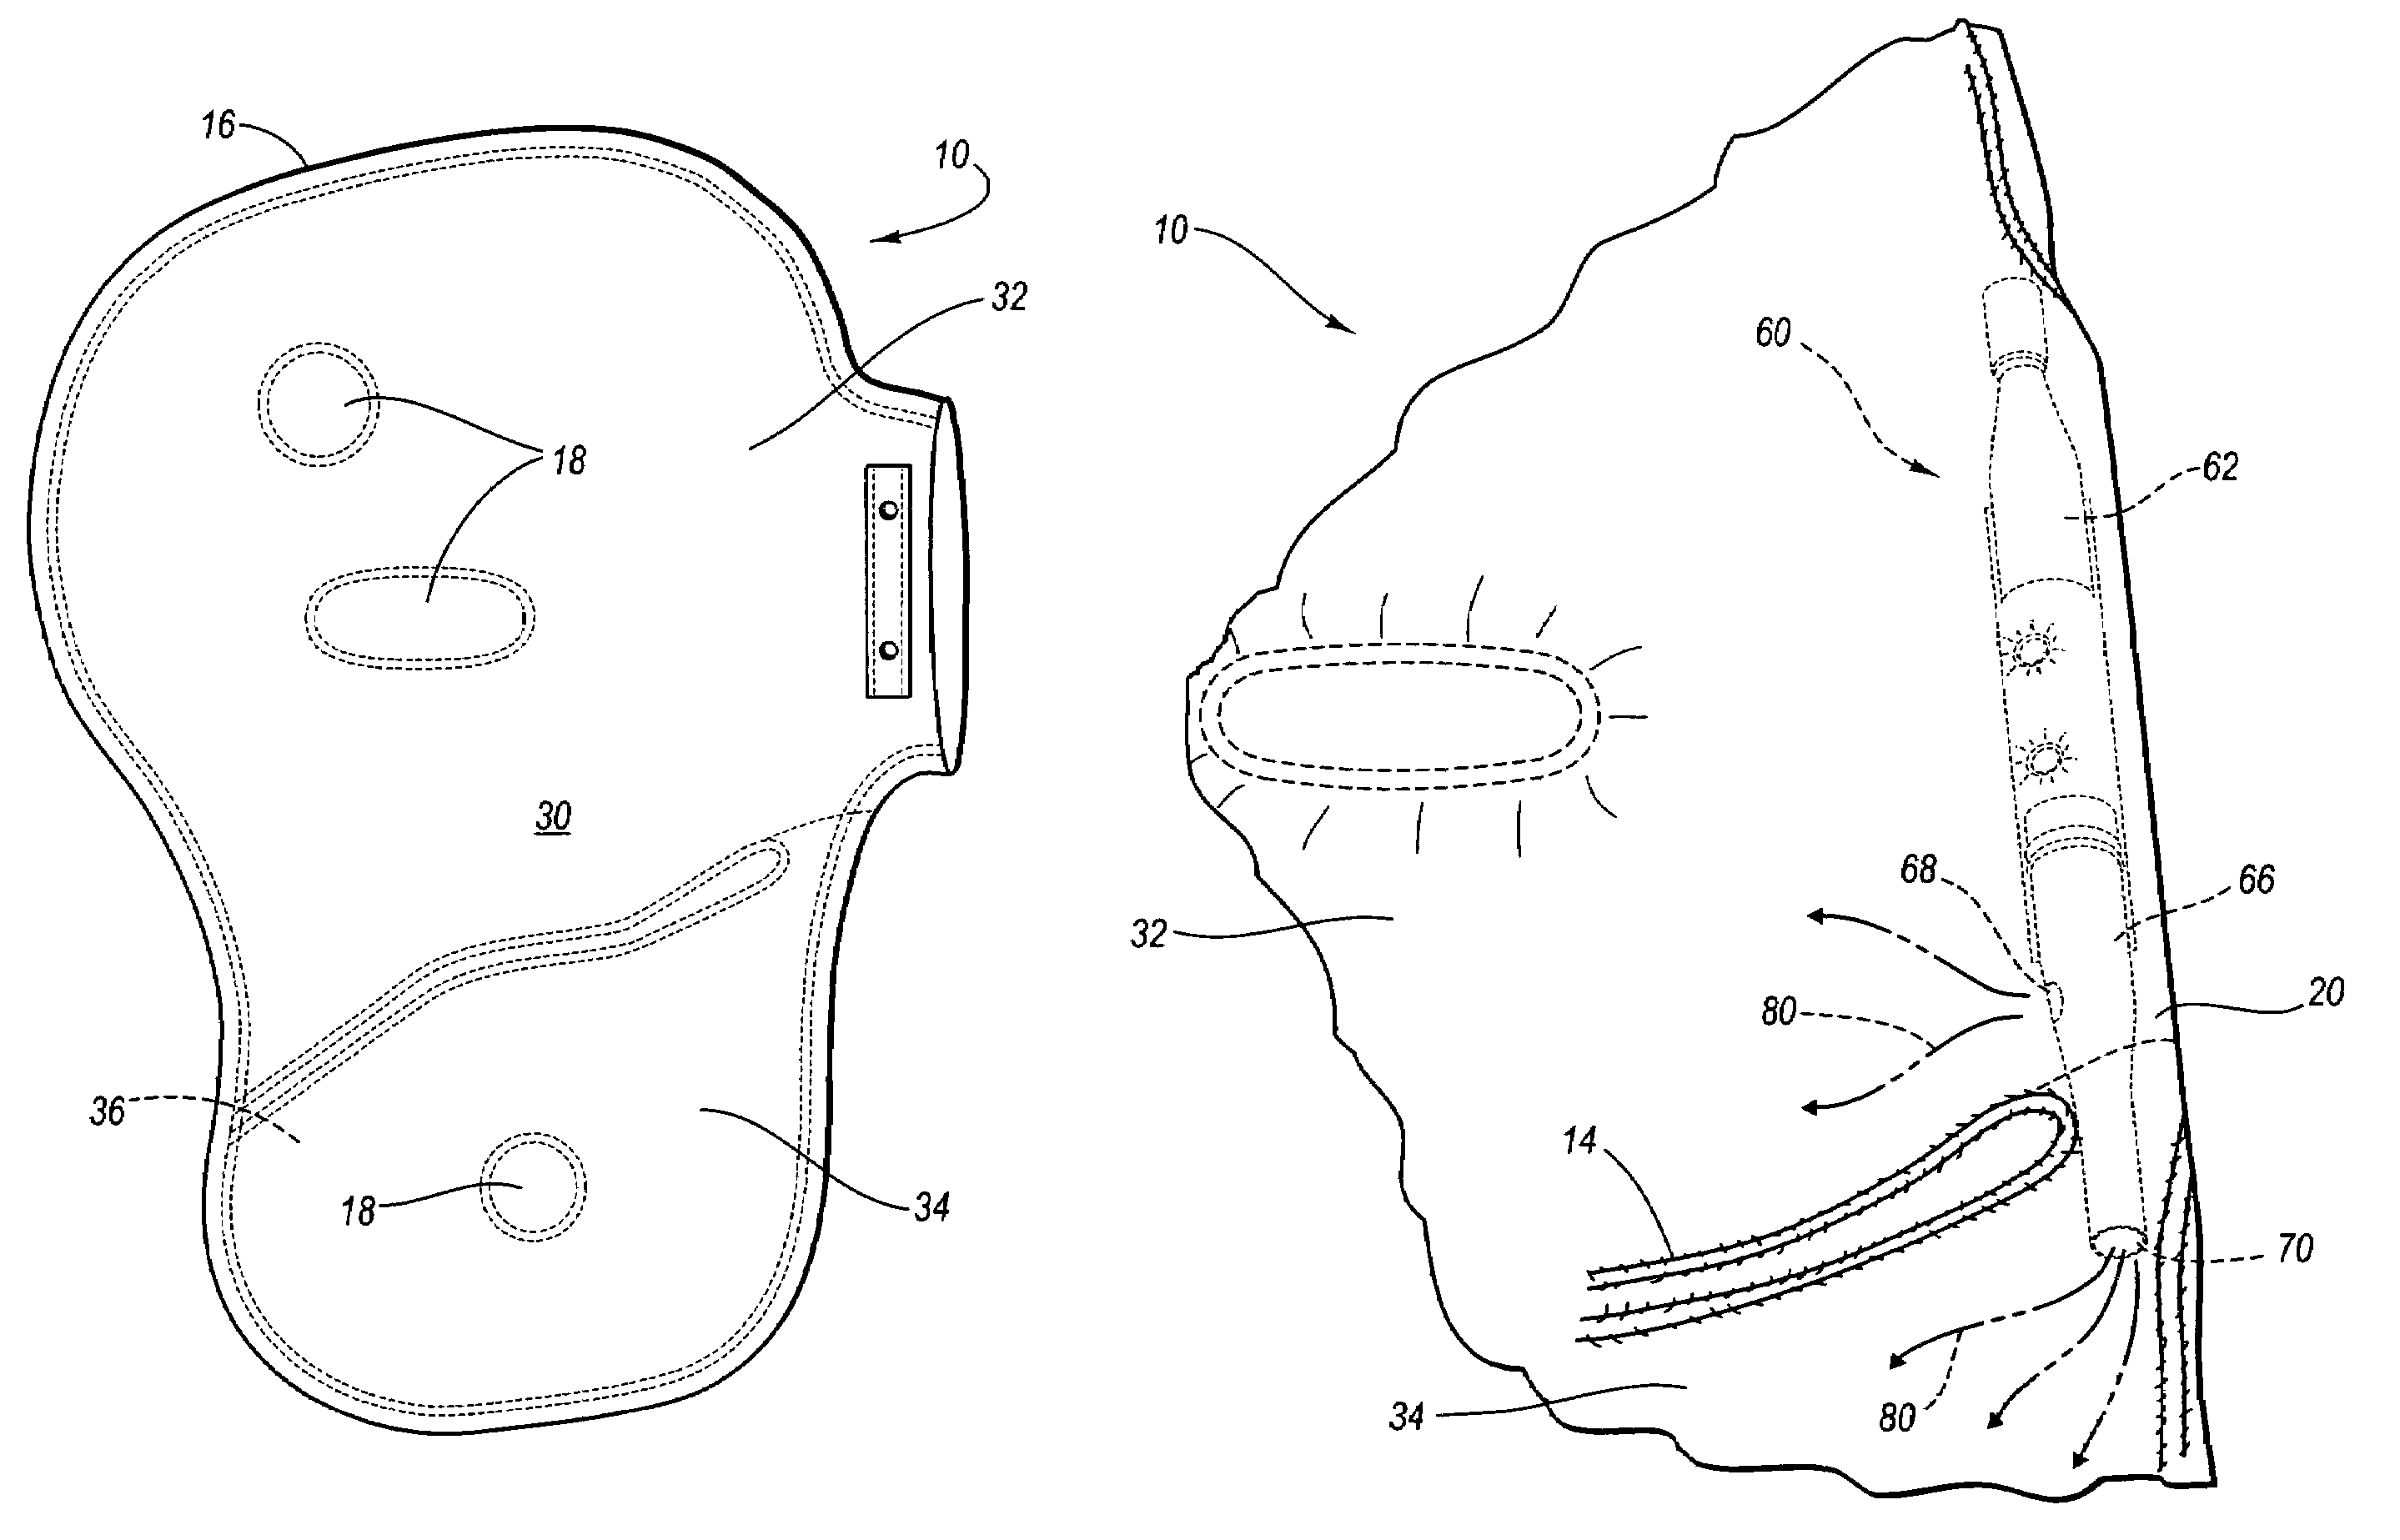 Inflatable airbag with overlapping chamber